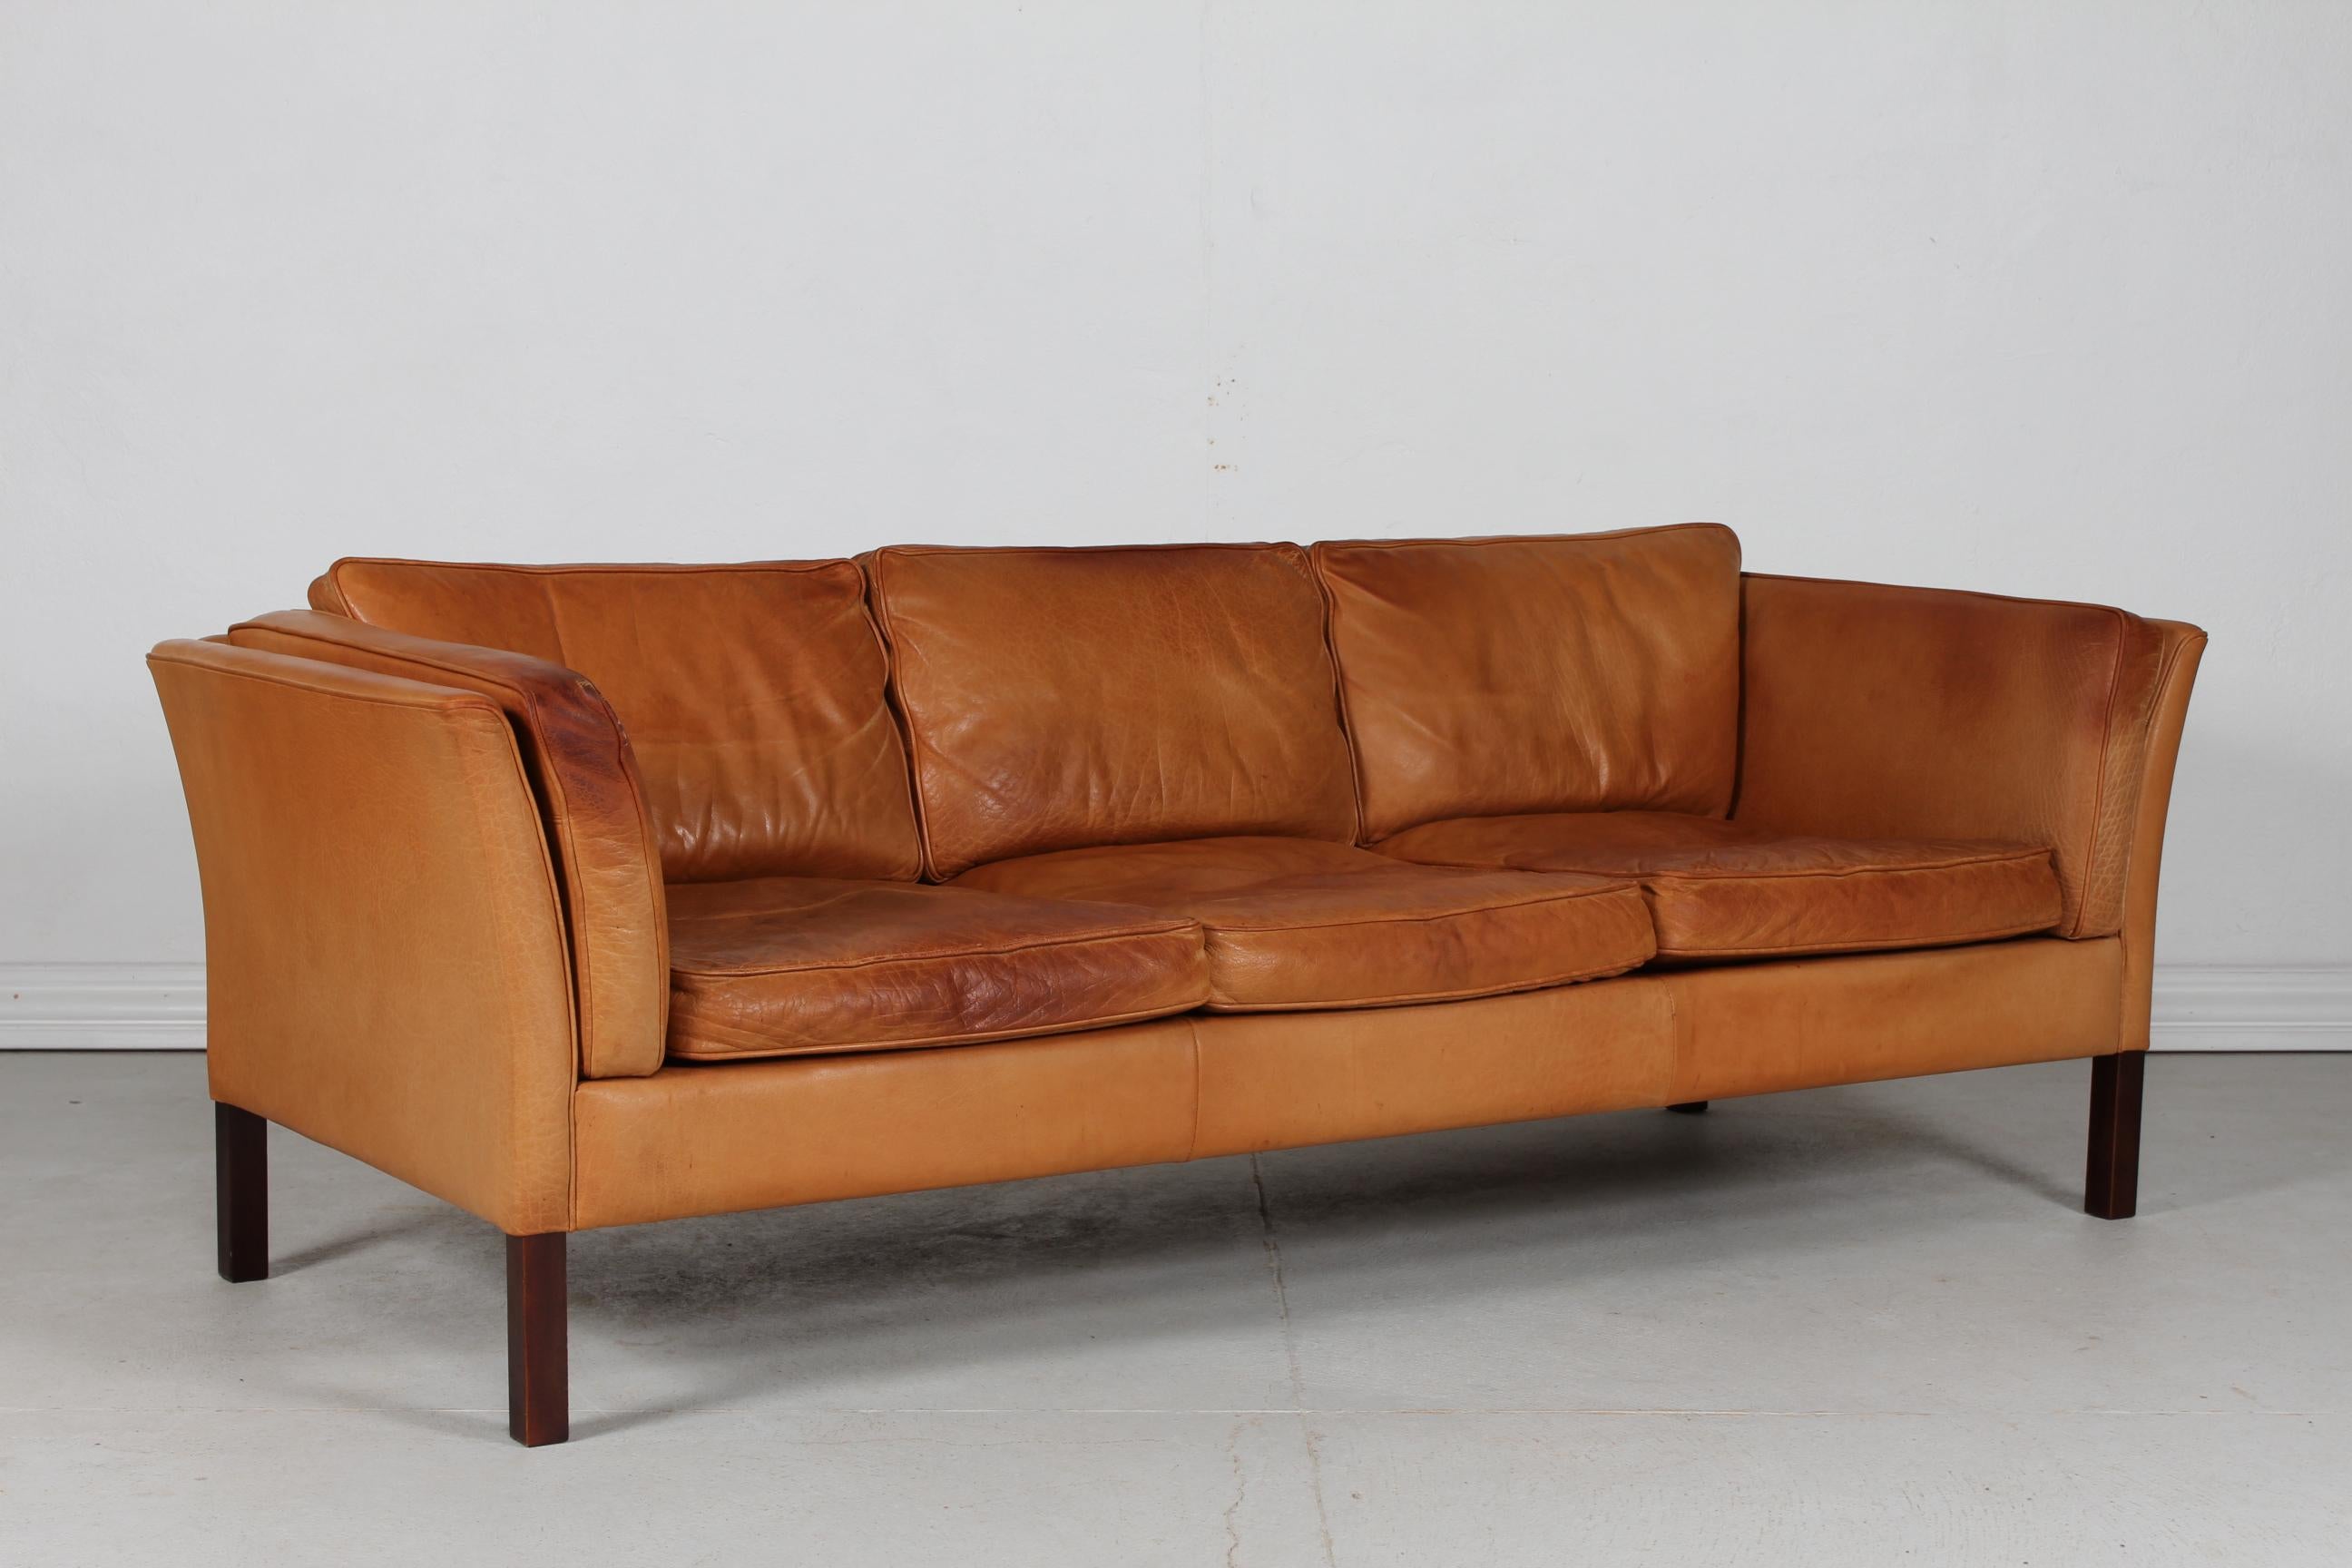 Mid-Century Modern Danish Modern 3-Seat Sofa with Patinated Cognac-Colored Leather 1970s by Stouby